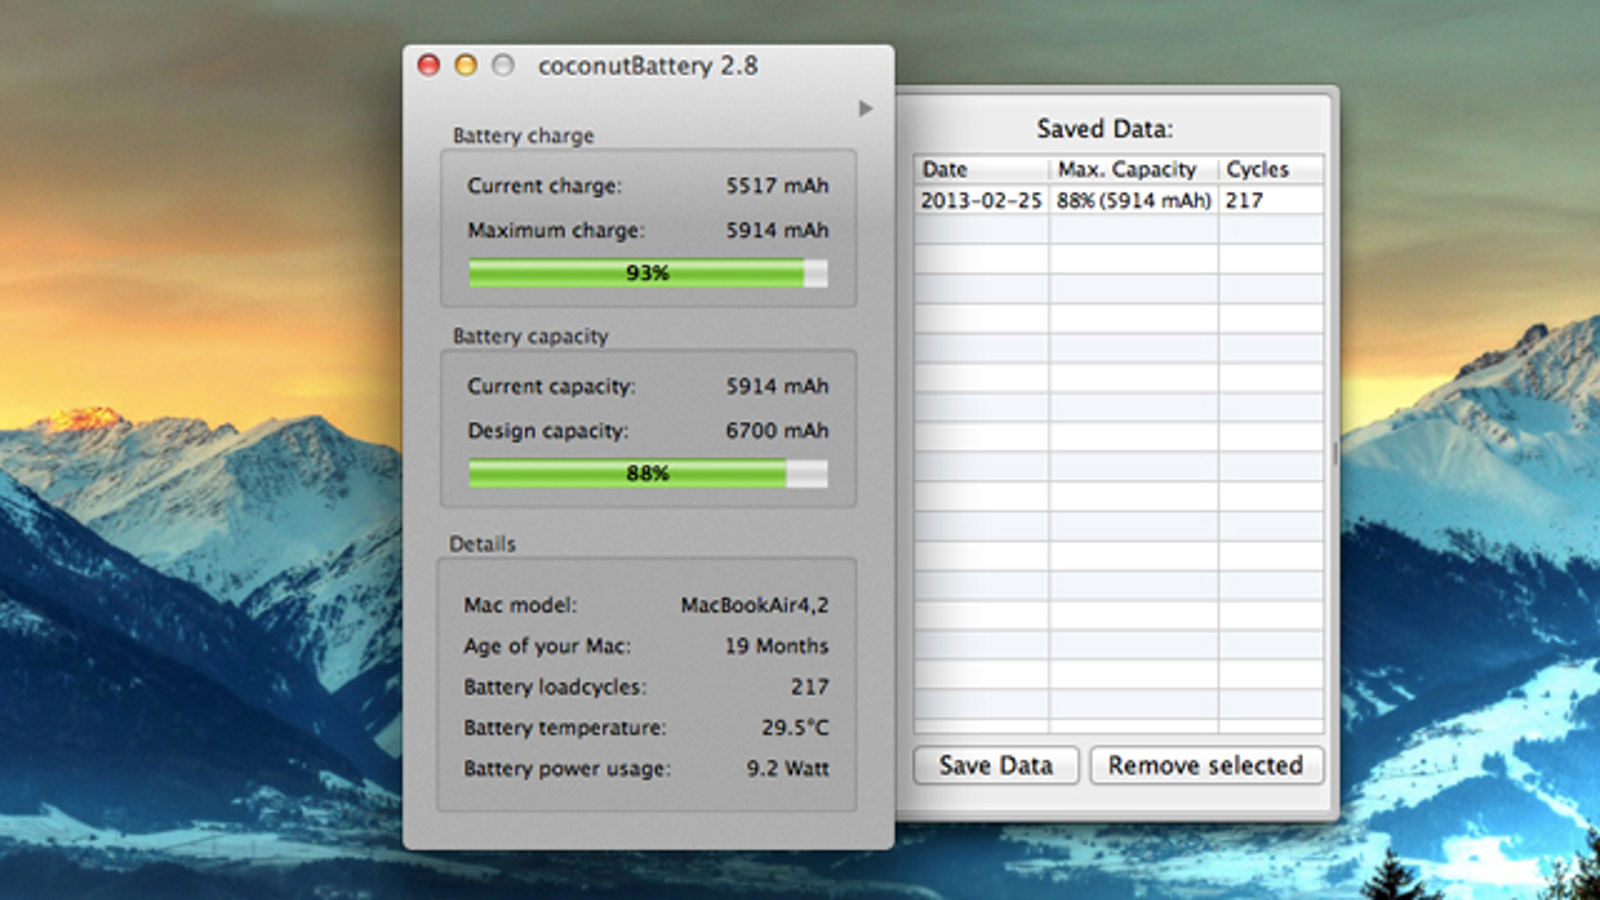 coconutbattery for windows monitoring iphone